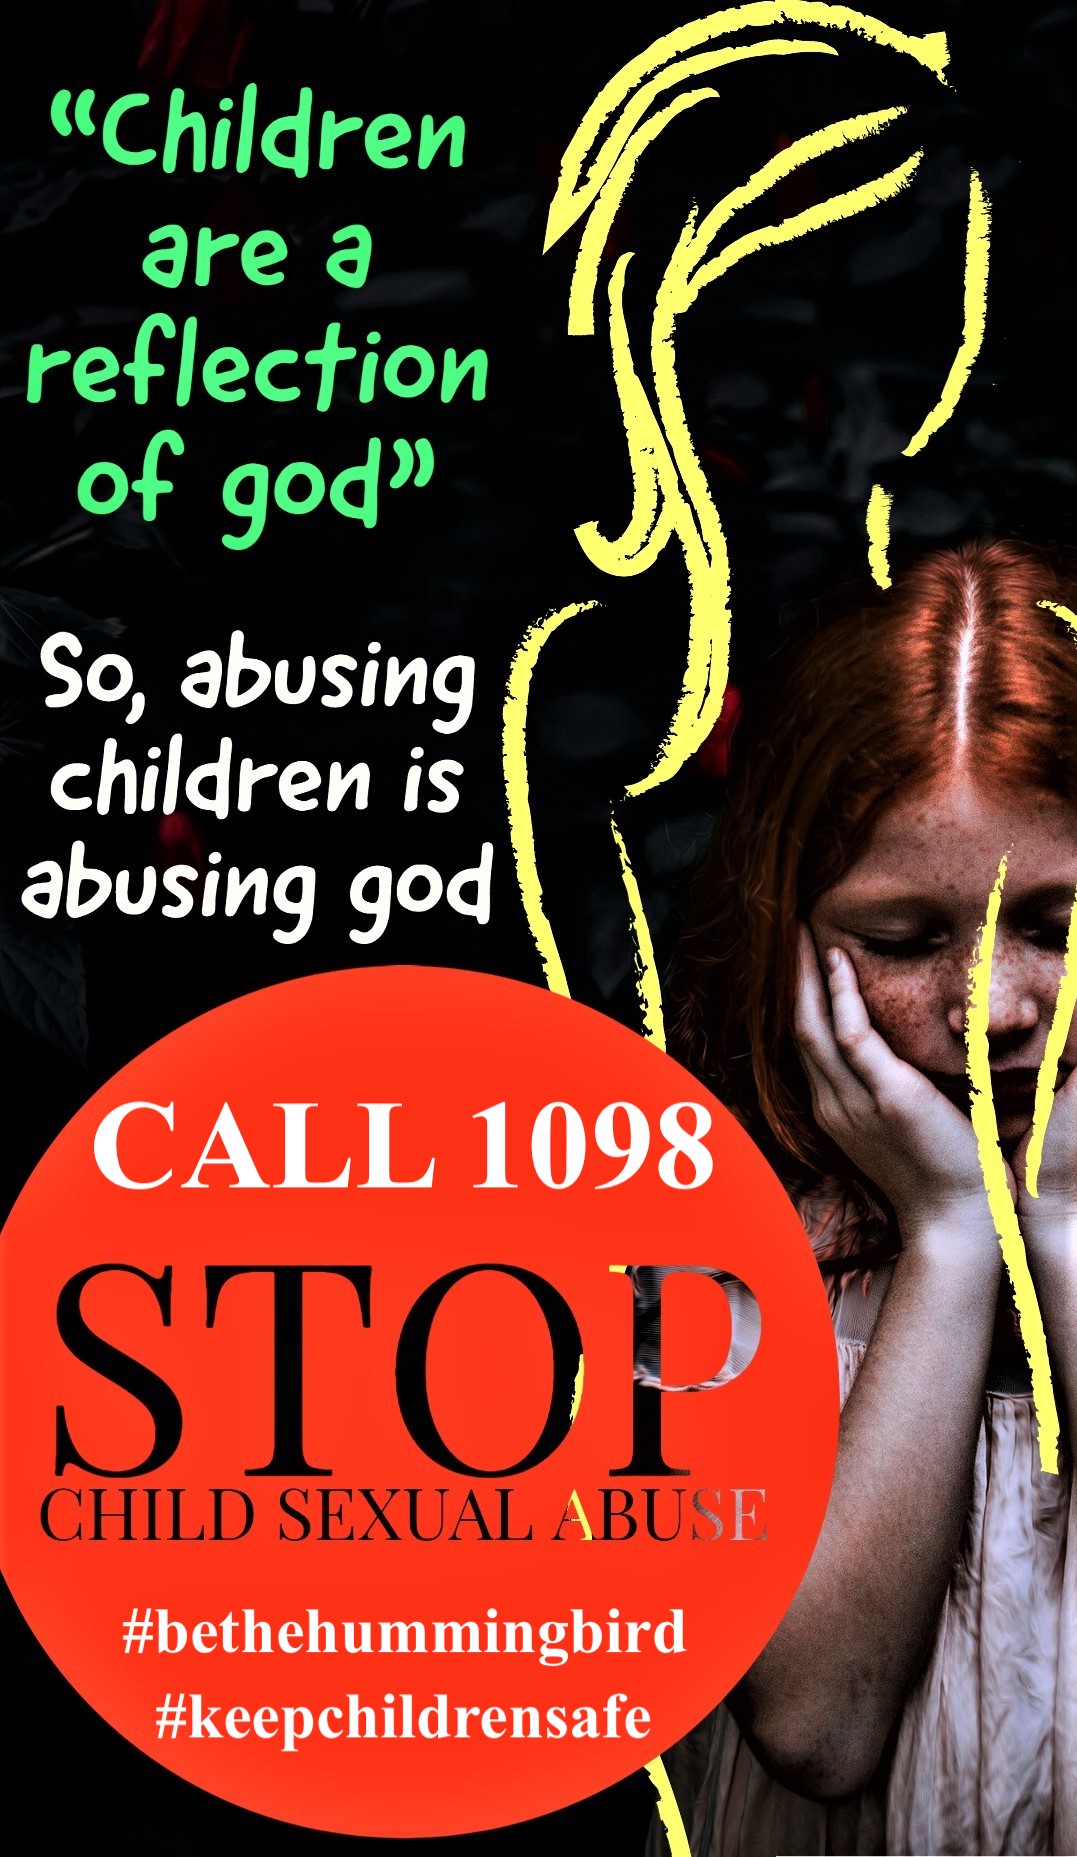 child-sexual-abuse-poster.jpg